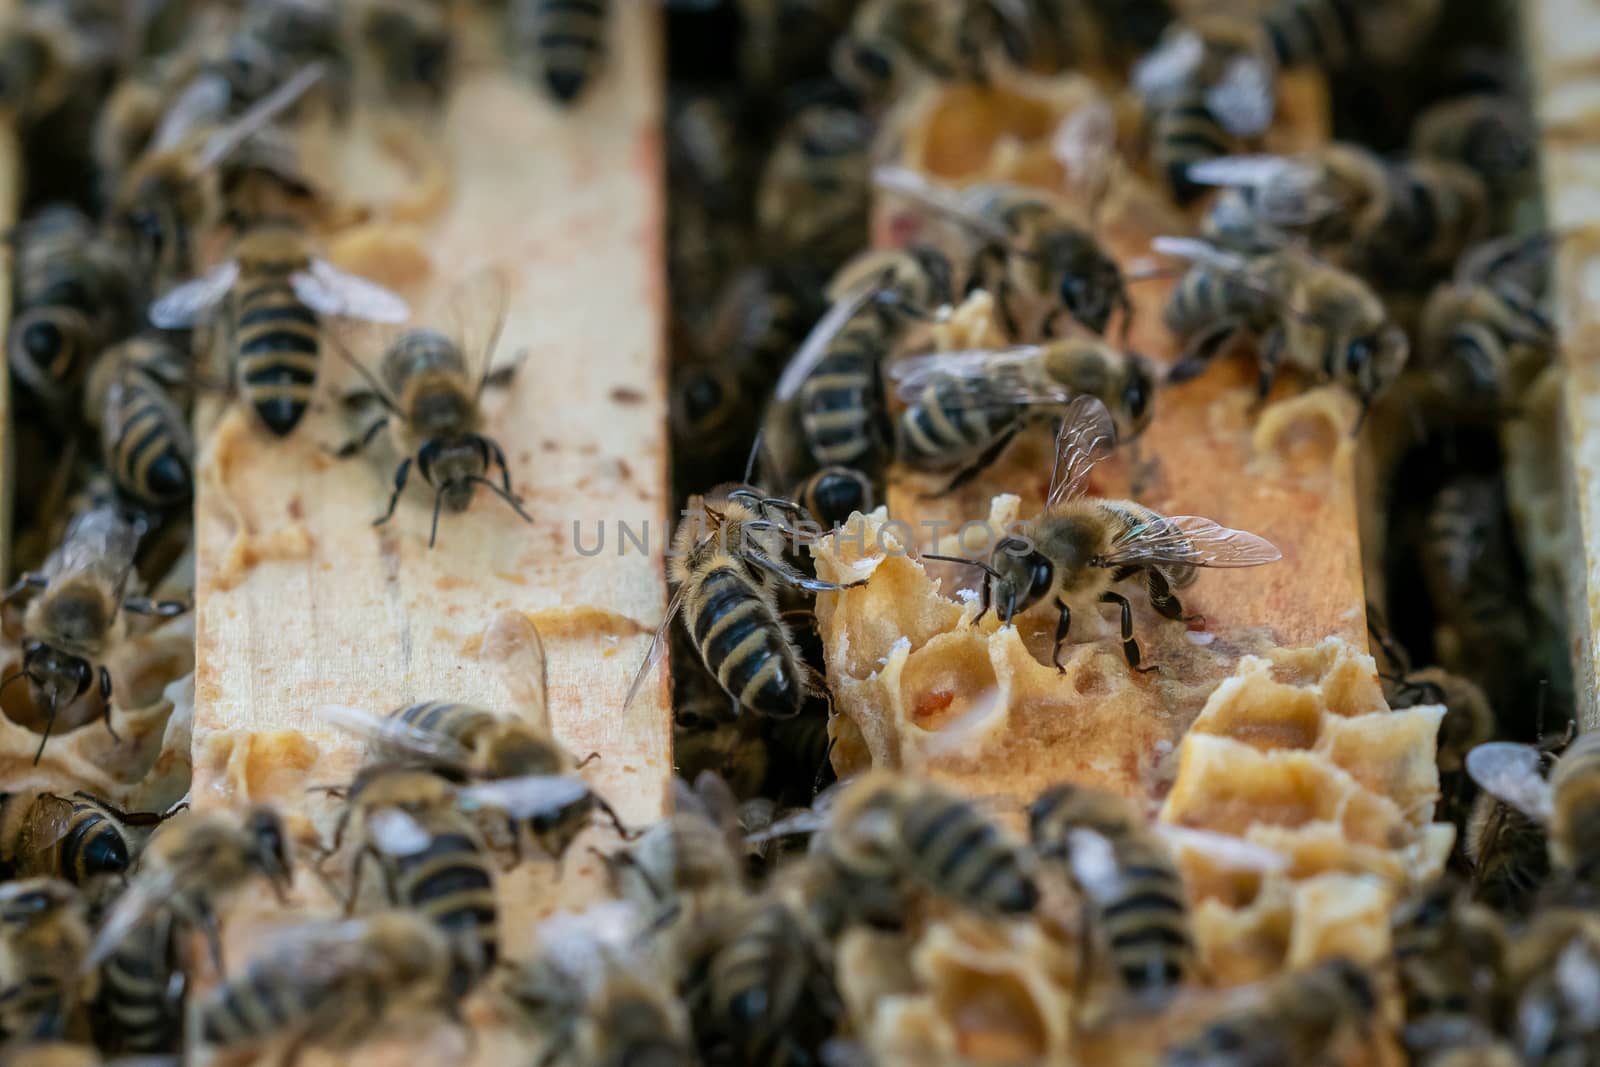 Close up view of the open hive showing the frames populated by honey bees.
Bees in honeycomb.